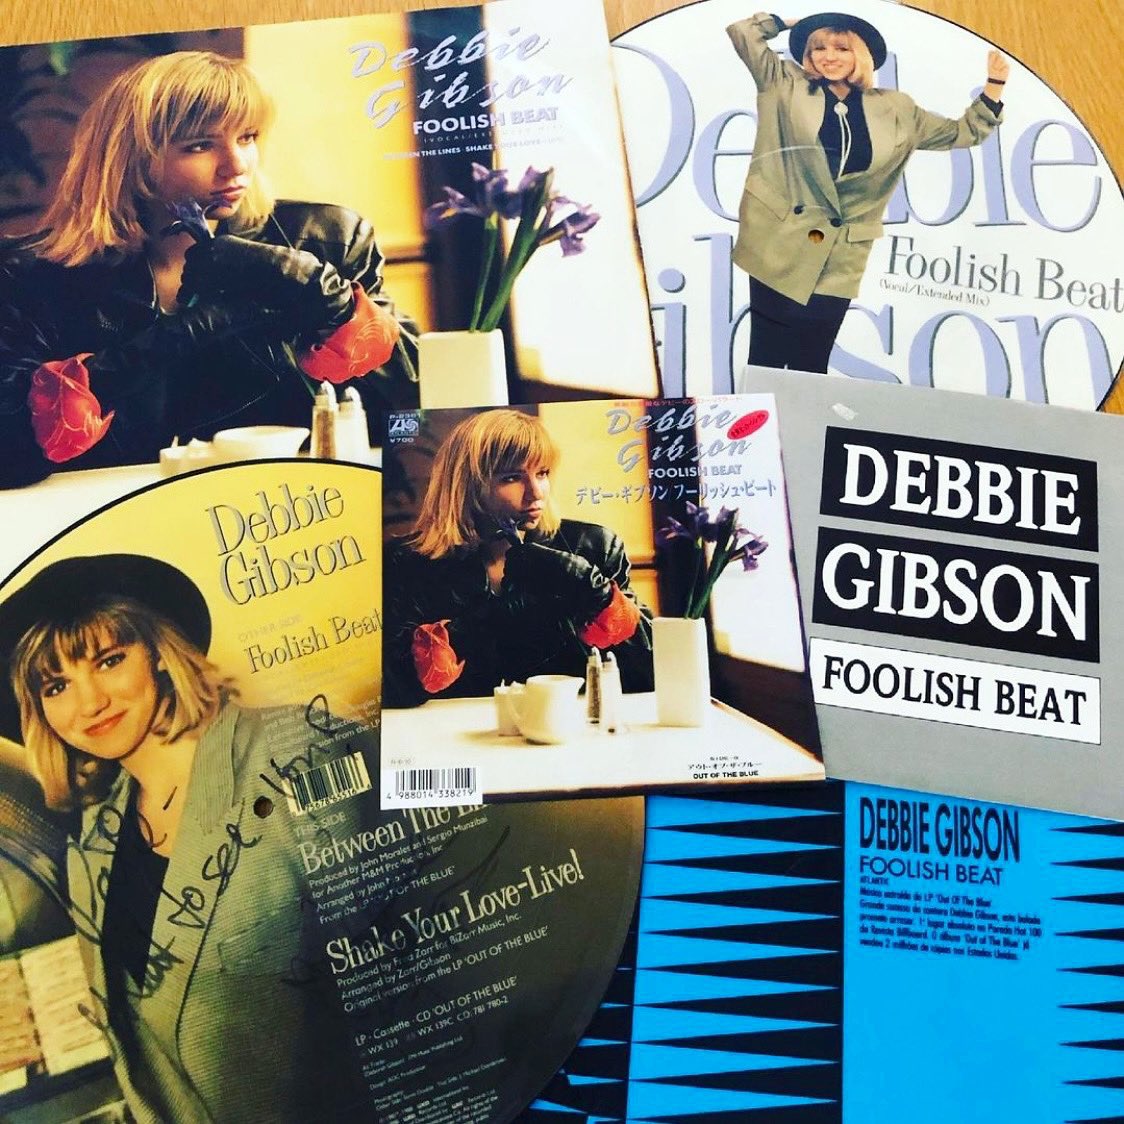 For the week ending June 25, 1988, Debbie Gibson hit #1 on the #billboardhot100 chart with Foolish Beat. It was the longest running #1 song on my weekly chart in the 80s, 24 wks.

#debbiegibson #deborahgibson #foolishbeat #foolishbeat35 #justafoolishbeatofmyheart #todayinpopmusic